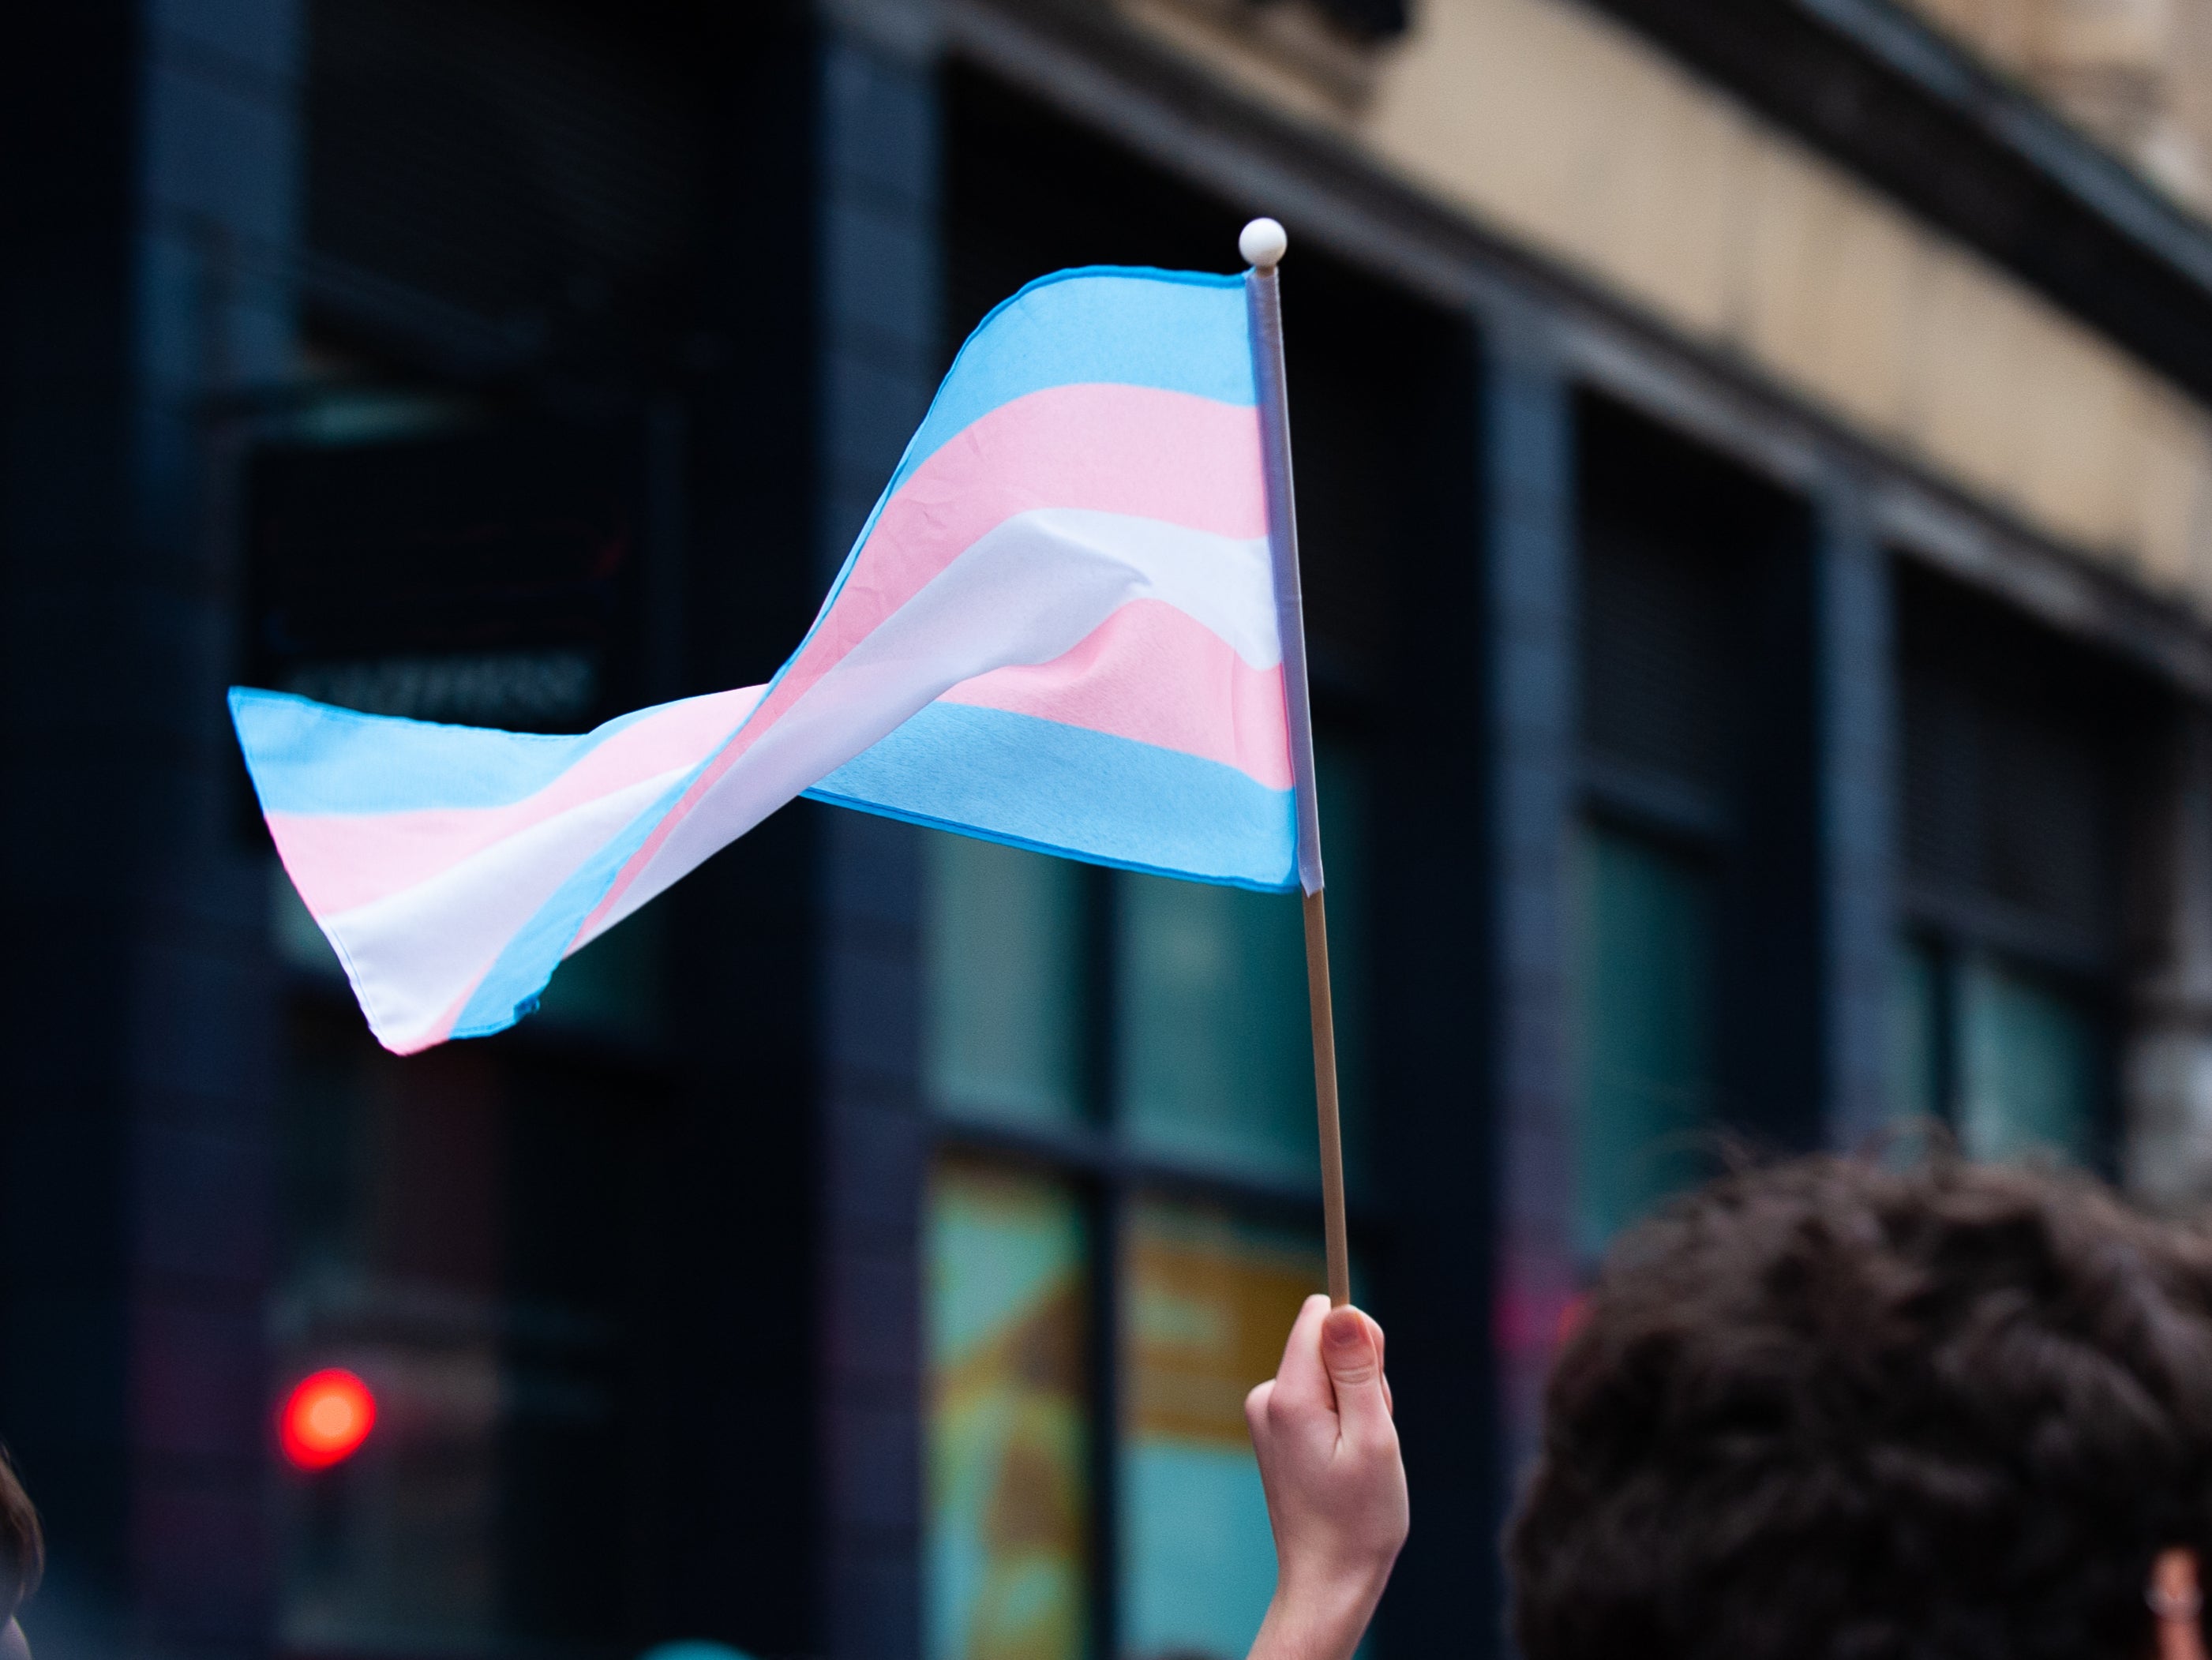 Campaigners warned they are hearing reports of abusers wielding transgender identity as an excuse to perpetrate violence and abuse